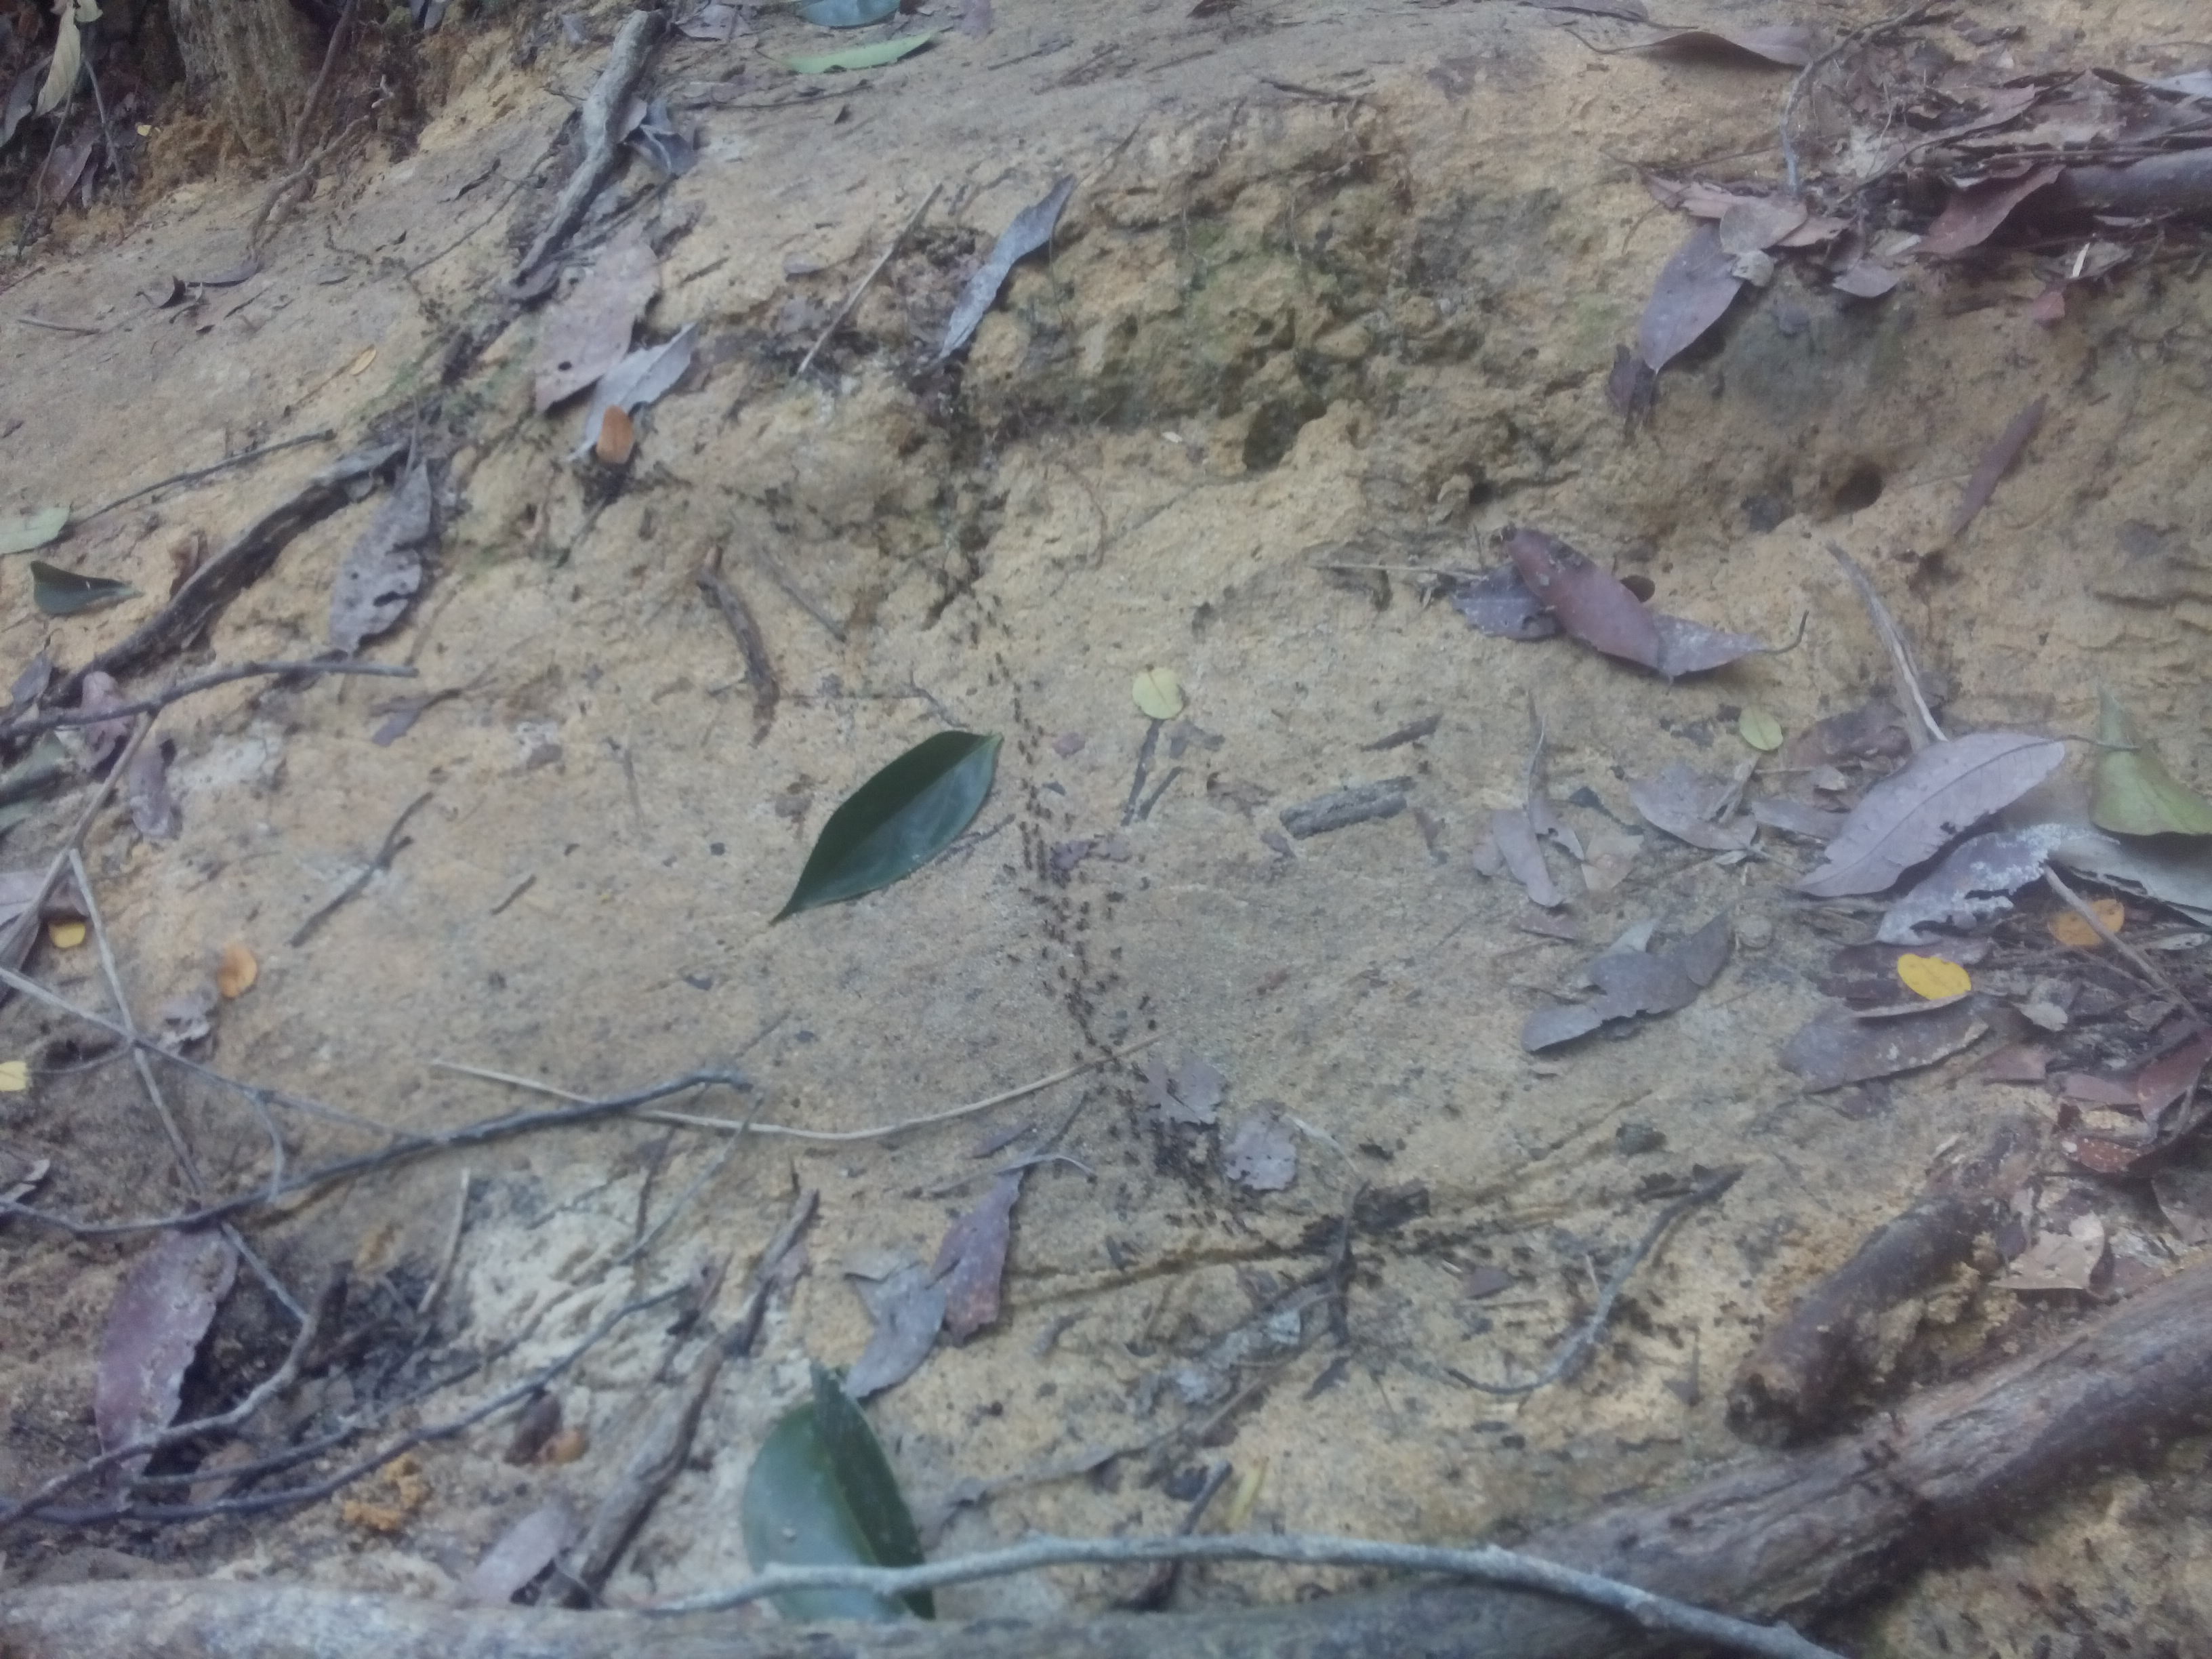 Jungle floor with branches, leaves, and trail of ants